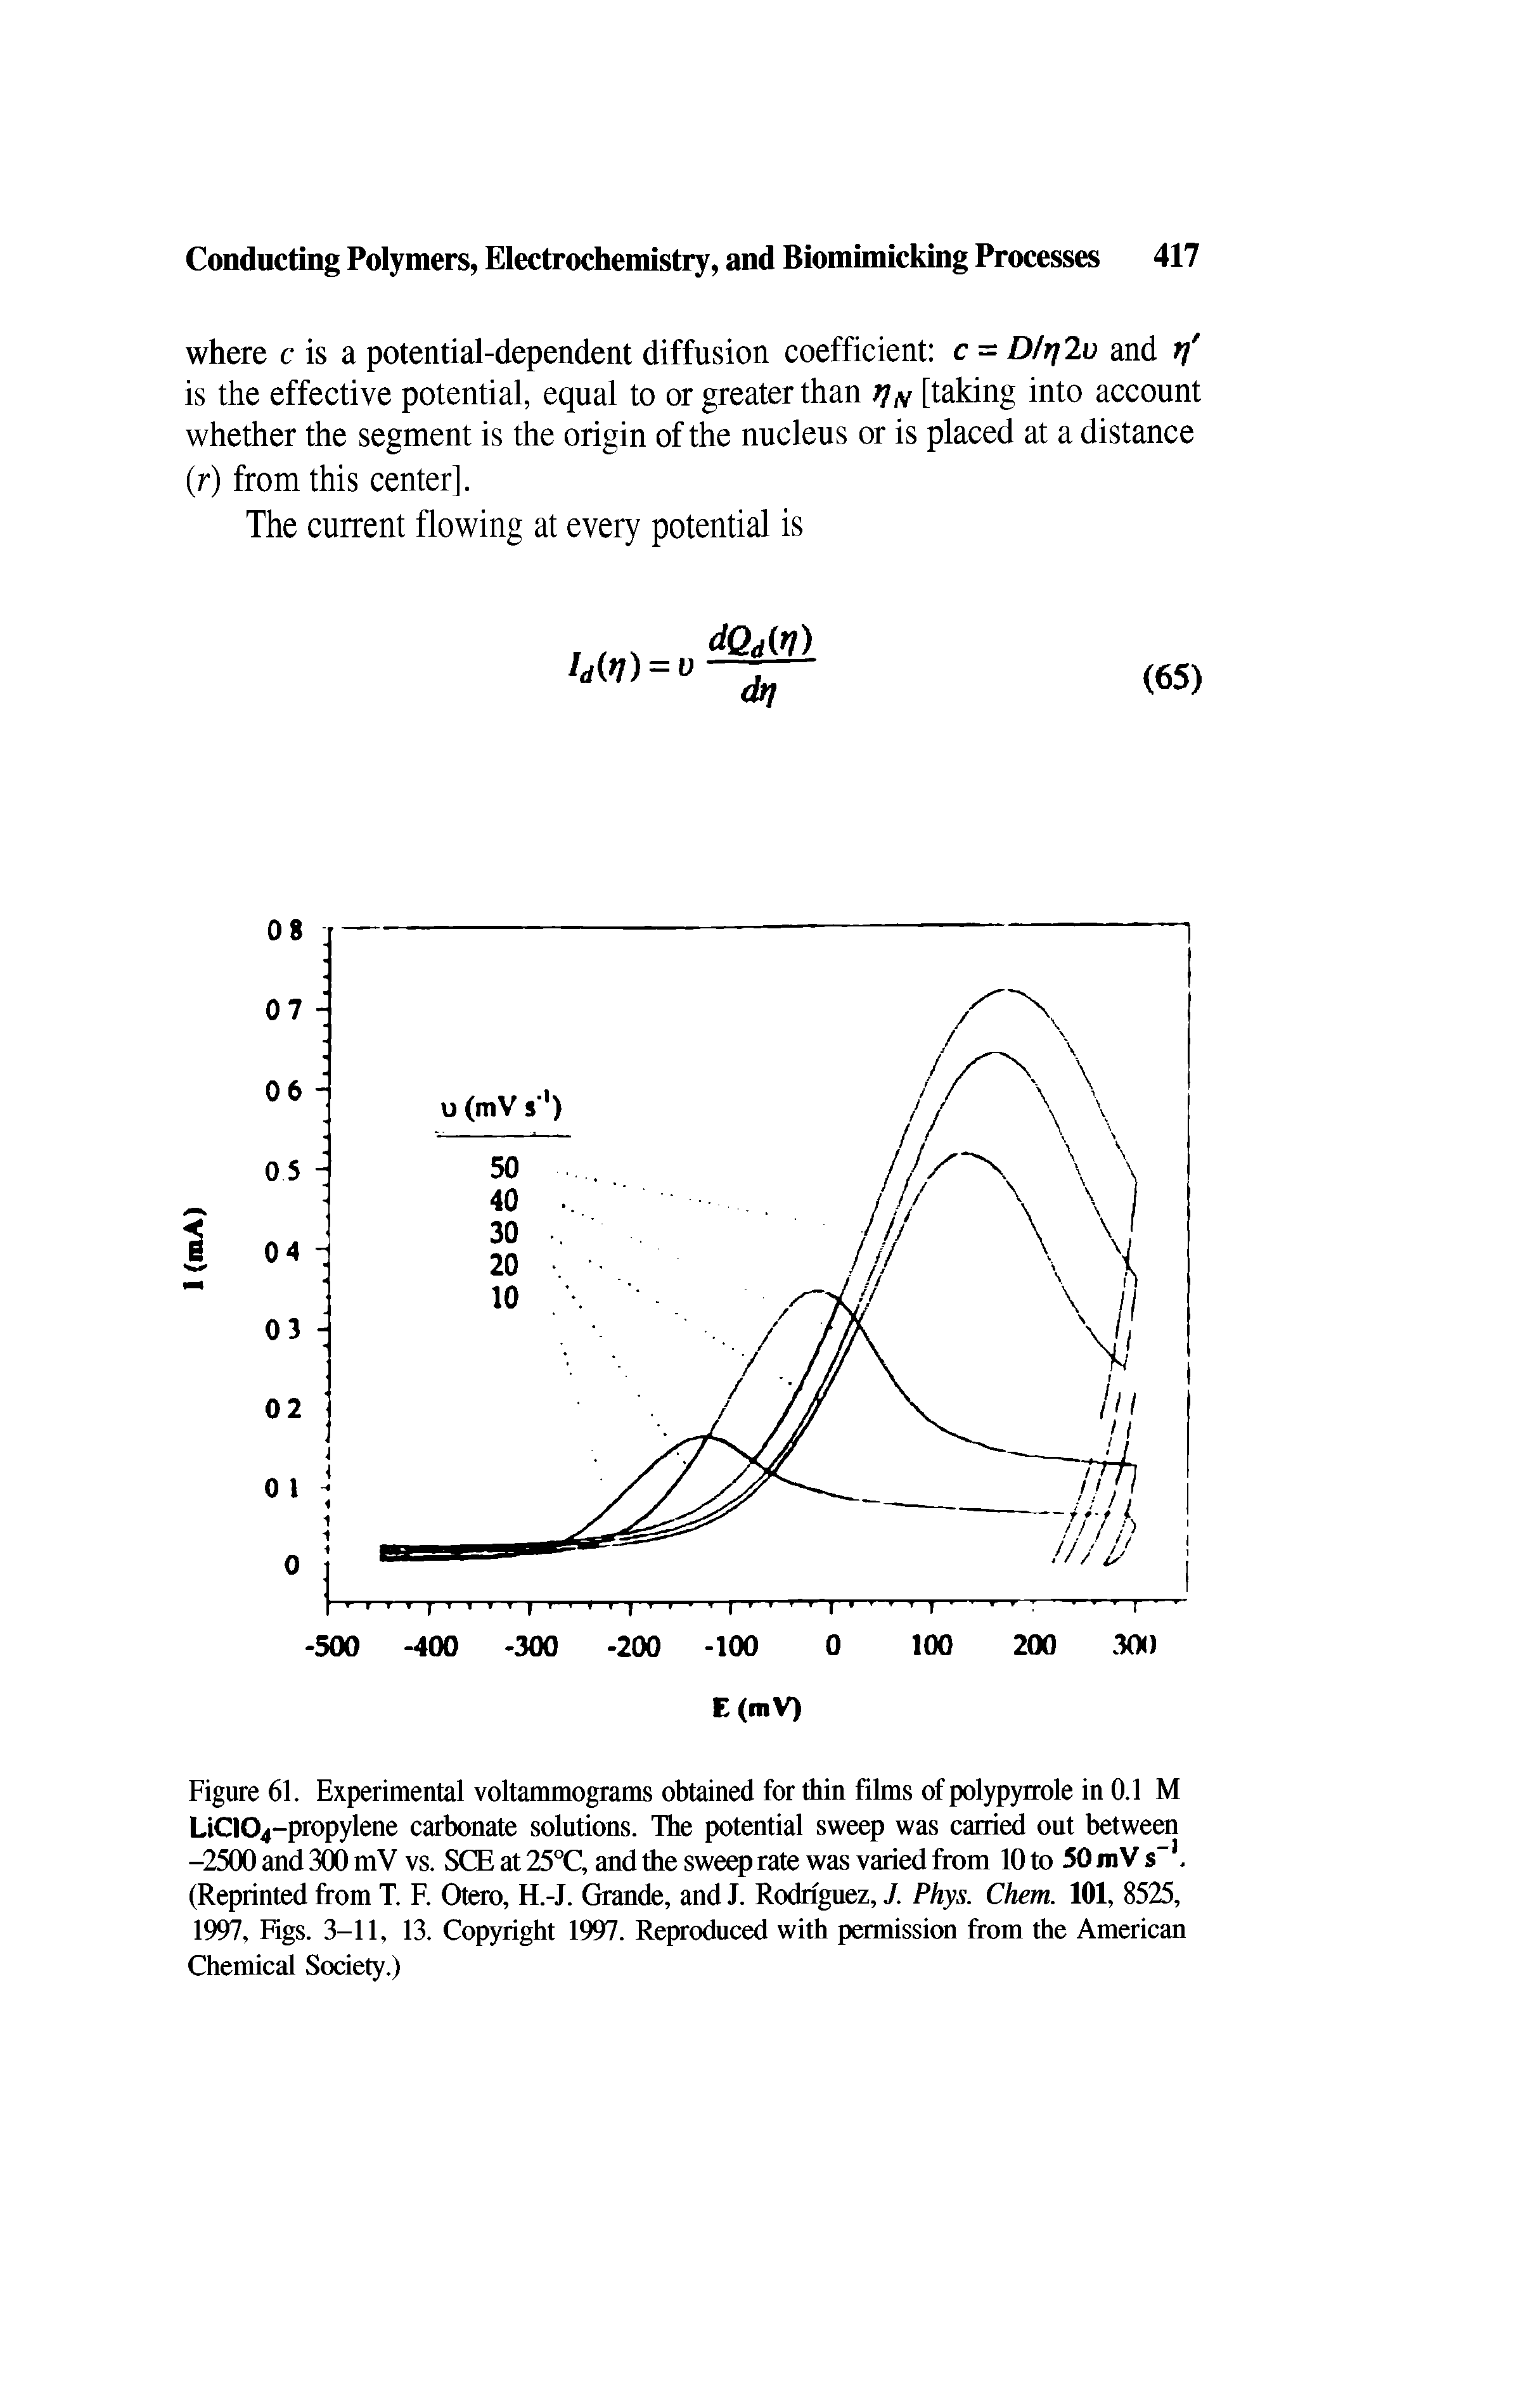 Figure 61. Experimental voltammograms obtained for thin films of polypyrrole in 0.1 M LiC104-propylene carbonate solutions. The potential sweep was carried out between -2500 and 300 mV vs. SCE at 25°C, and the sweep rate was varied from 10 to 50 mV s-1. (Reprinted from T. F. Otero, H.-J. Grande, and J. Rodriguez, J. Phys. Chem. 101, 8525, 1997, Figs. 3-11, 13. Copyright 1997. Reproduced with permission from the American Chemical Society.)...